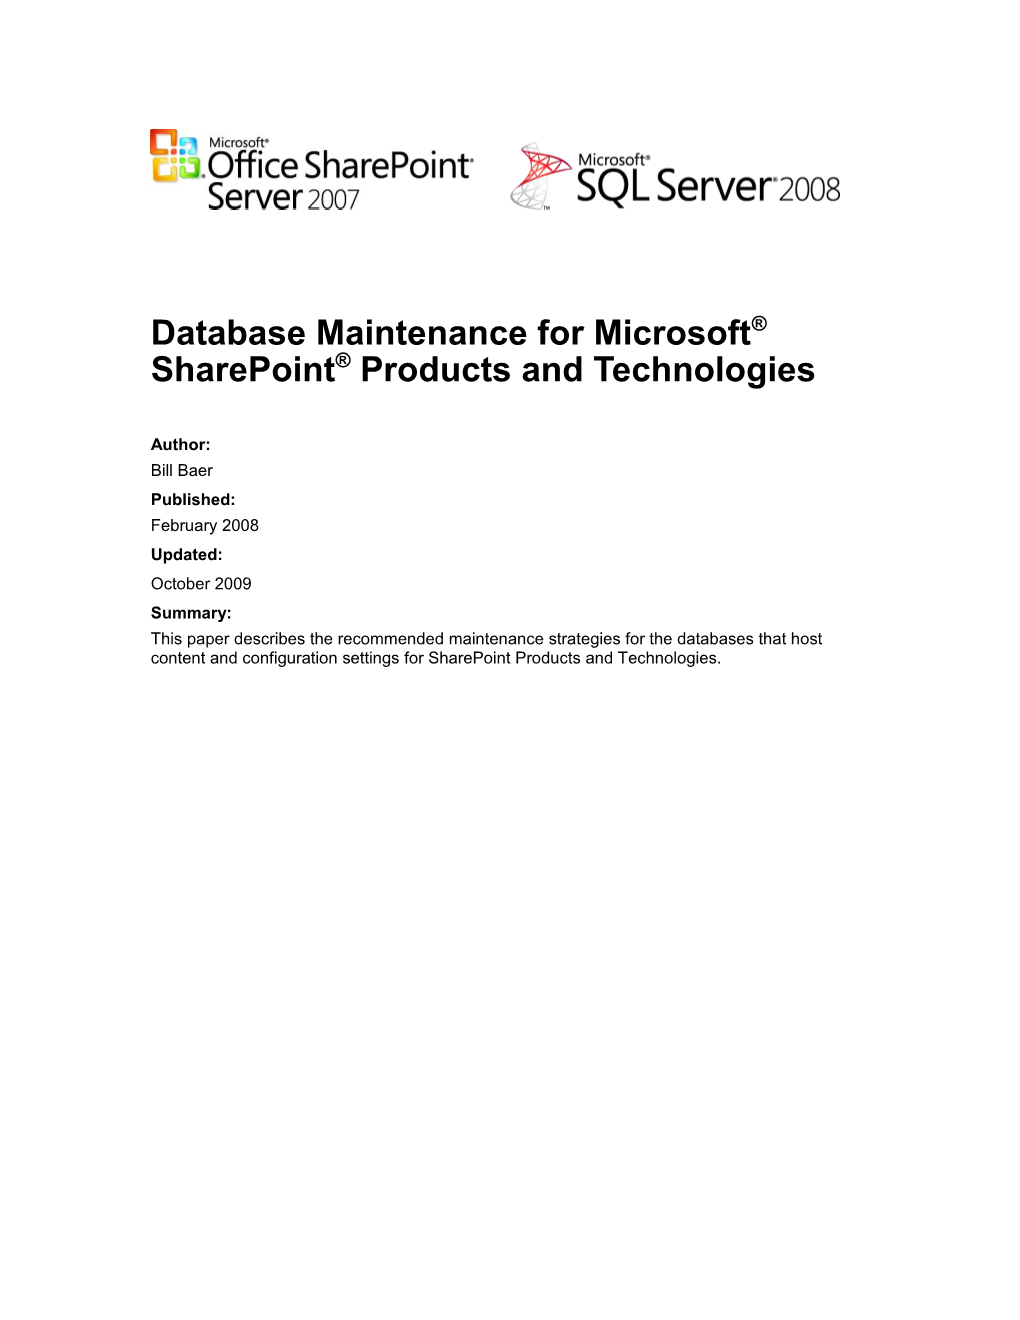 Database Maintenance for Microsoft Sharepoint Products and Technologies